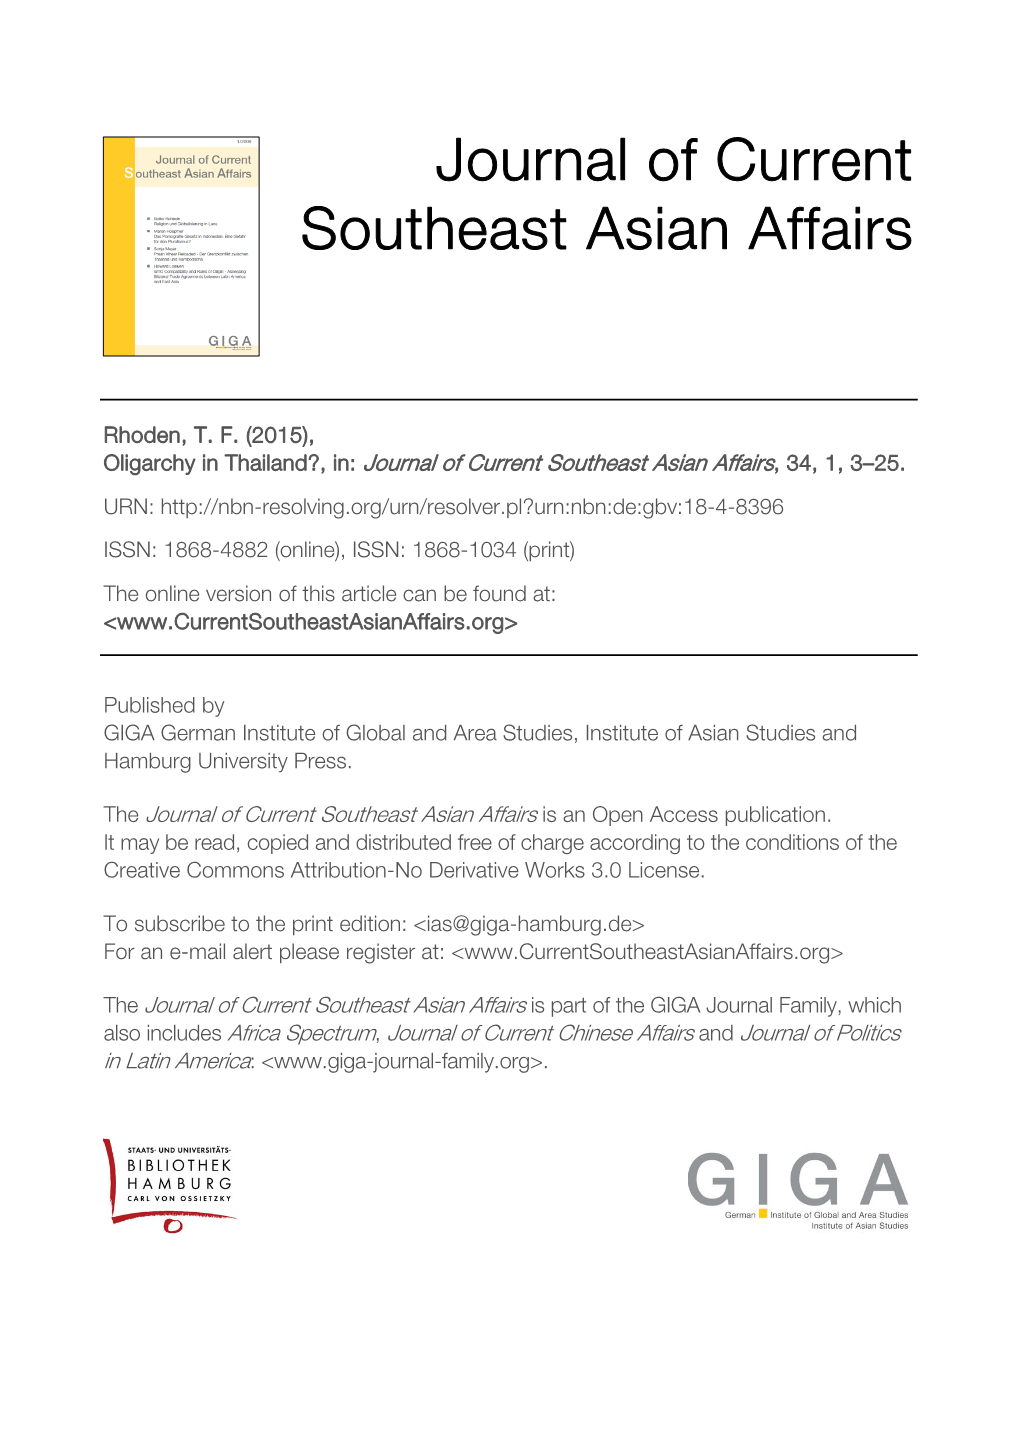 Journal of Current Southeast Asian Affairs, Vol 34, No 1